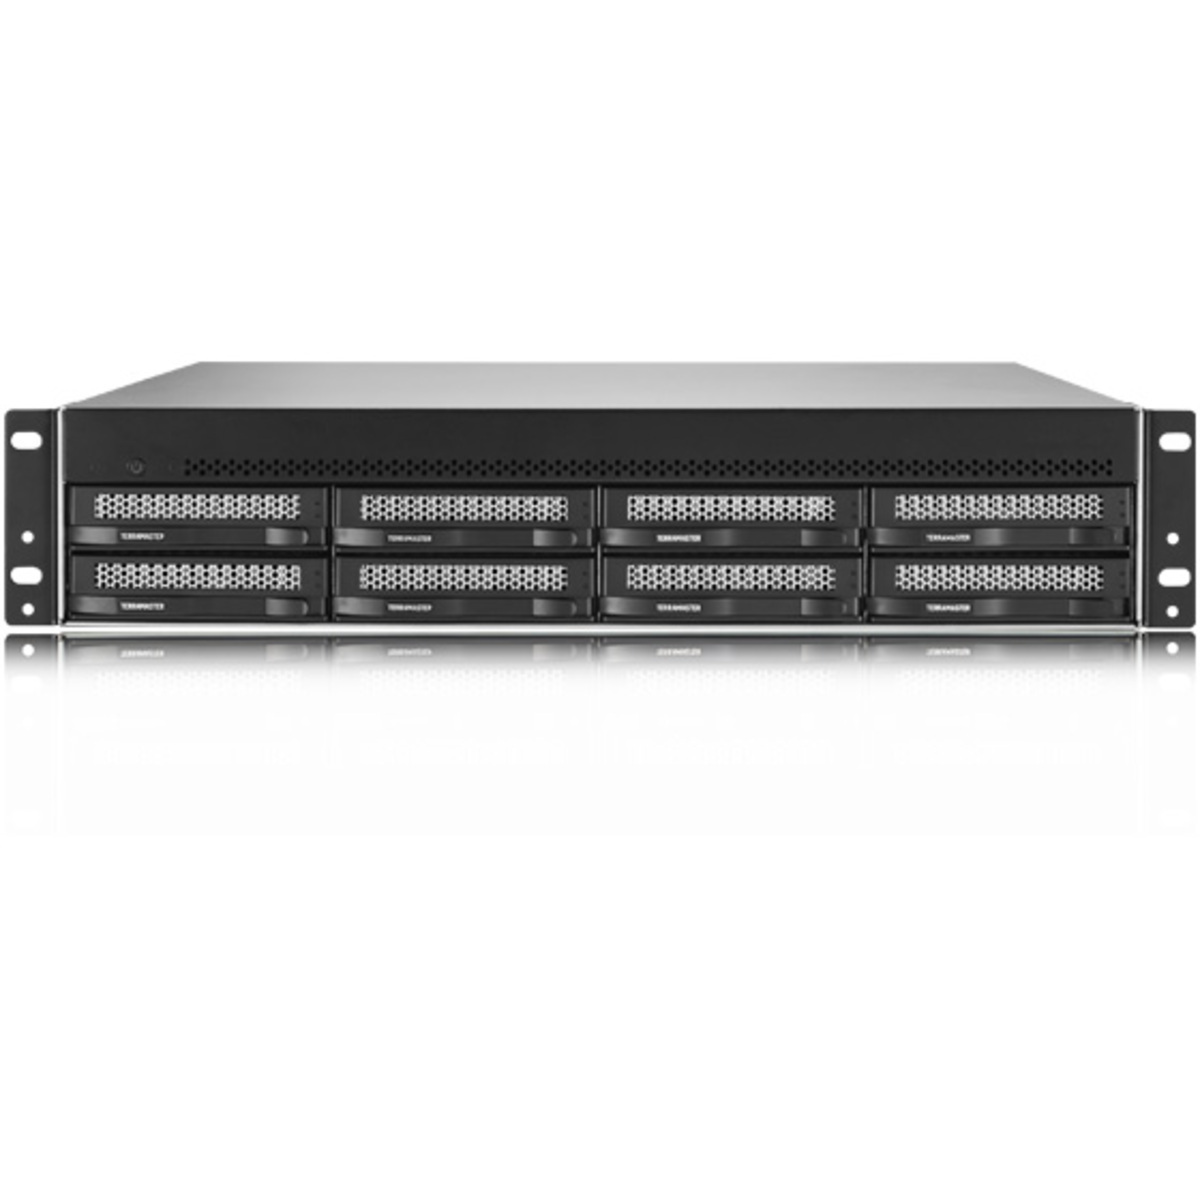 TerraMaster U8-450 154tb 8-Bay RackMount Multimedia / Power User / Business NAS - Network Attached Storage Device 7x22tb Seagate IronWolf Pro ST22000NT001 3.5 7200rpm SATA 6Gb/s HDD NAS Class Drives Installed - Burn-In Tested U8-450